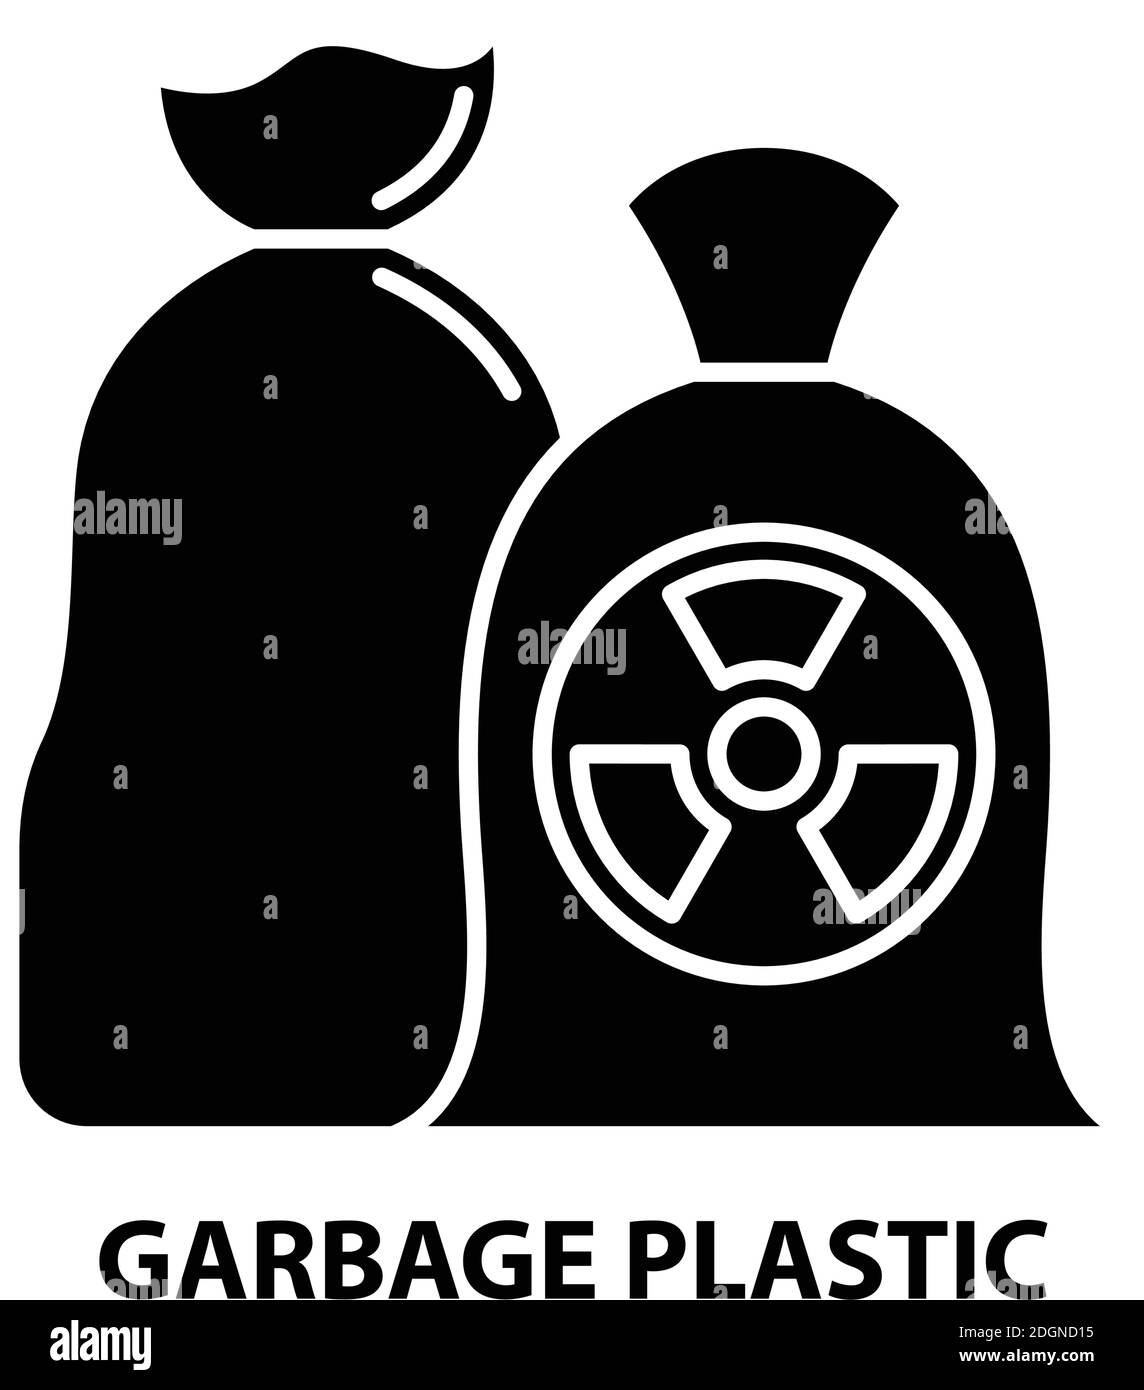 garbage plastic icon, black vector sign with editable strokes, concept illustration Stock Vector